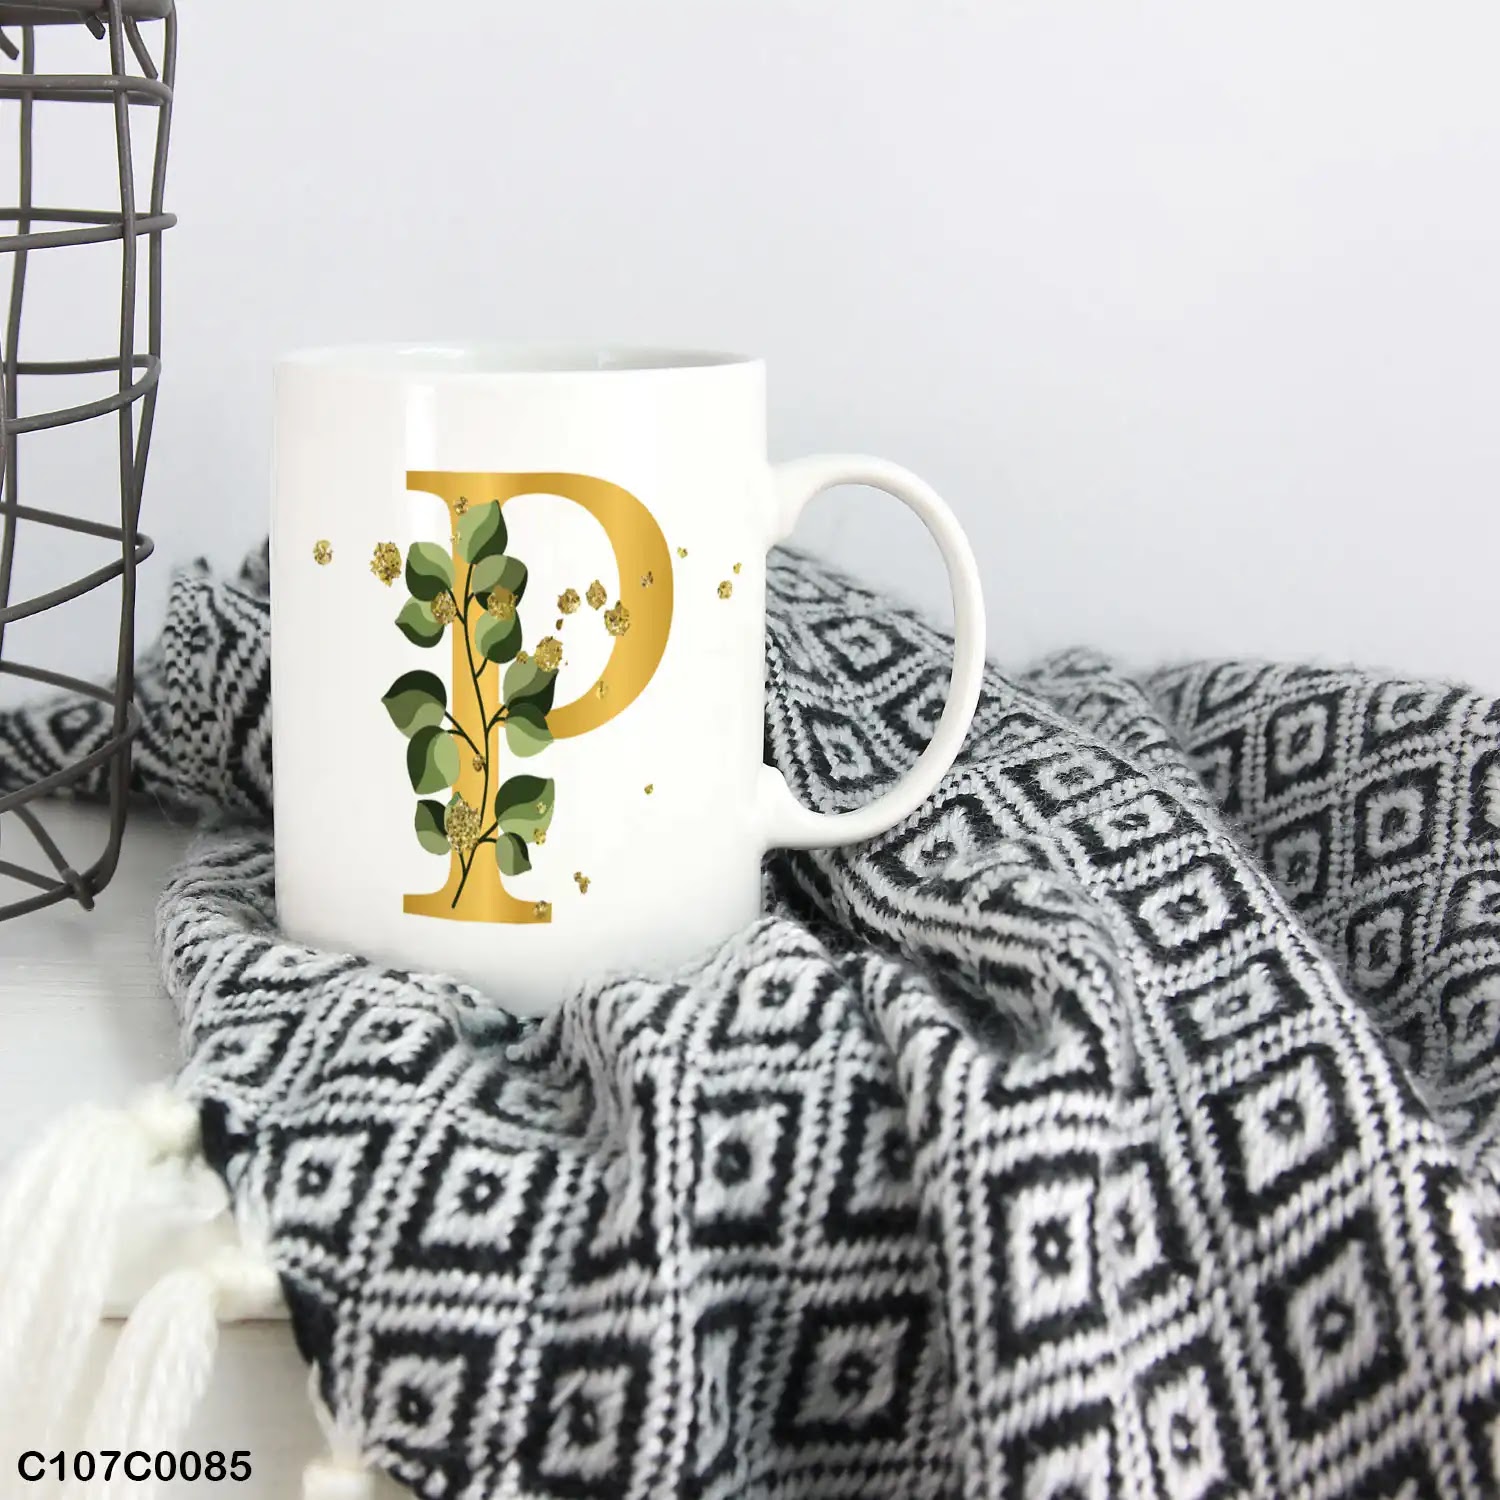 A white mug (cup) printed with gold Letter "P" and small green branch